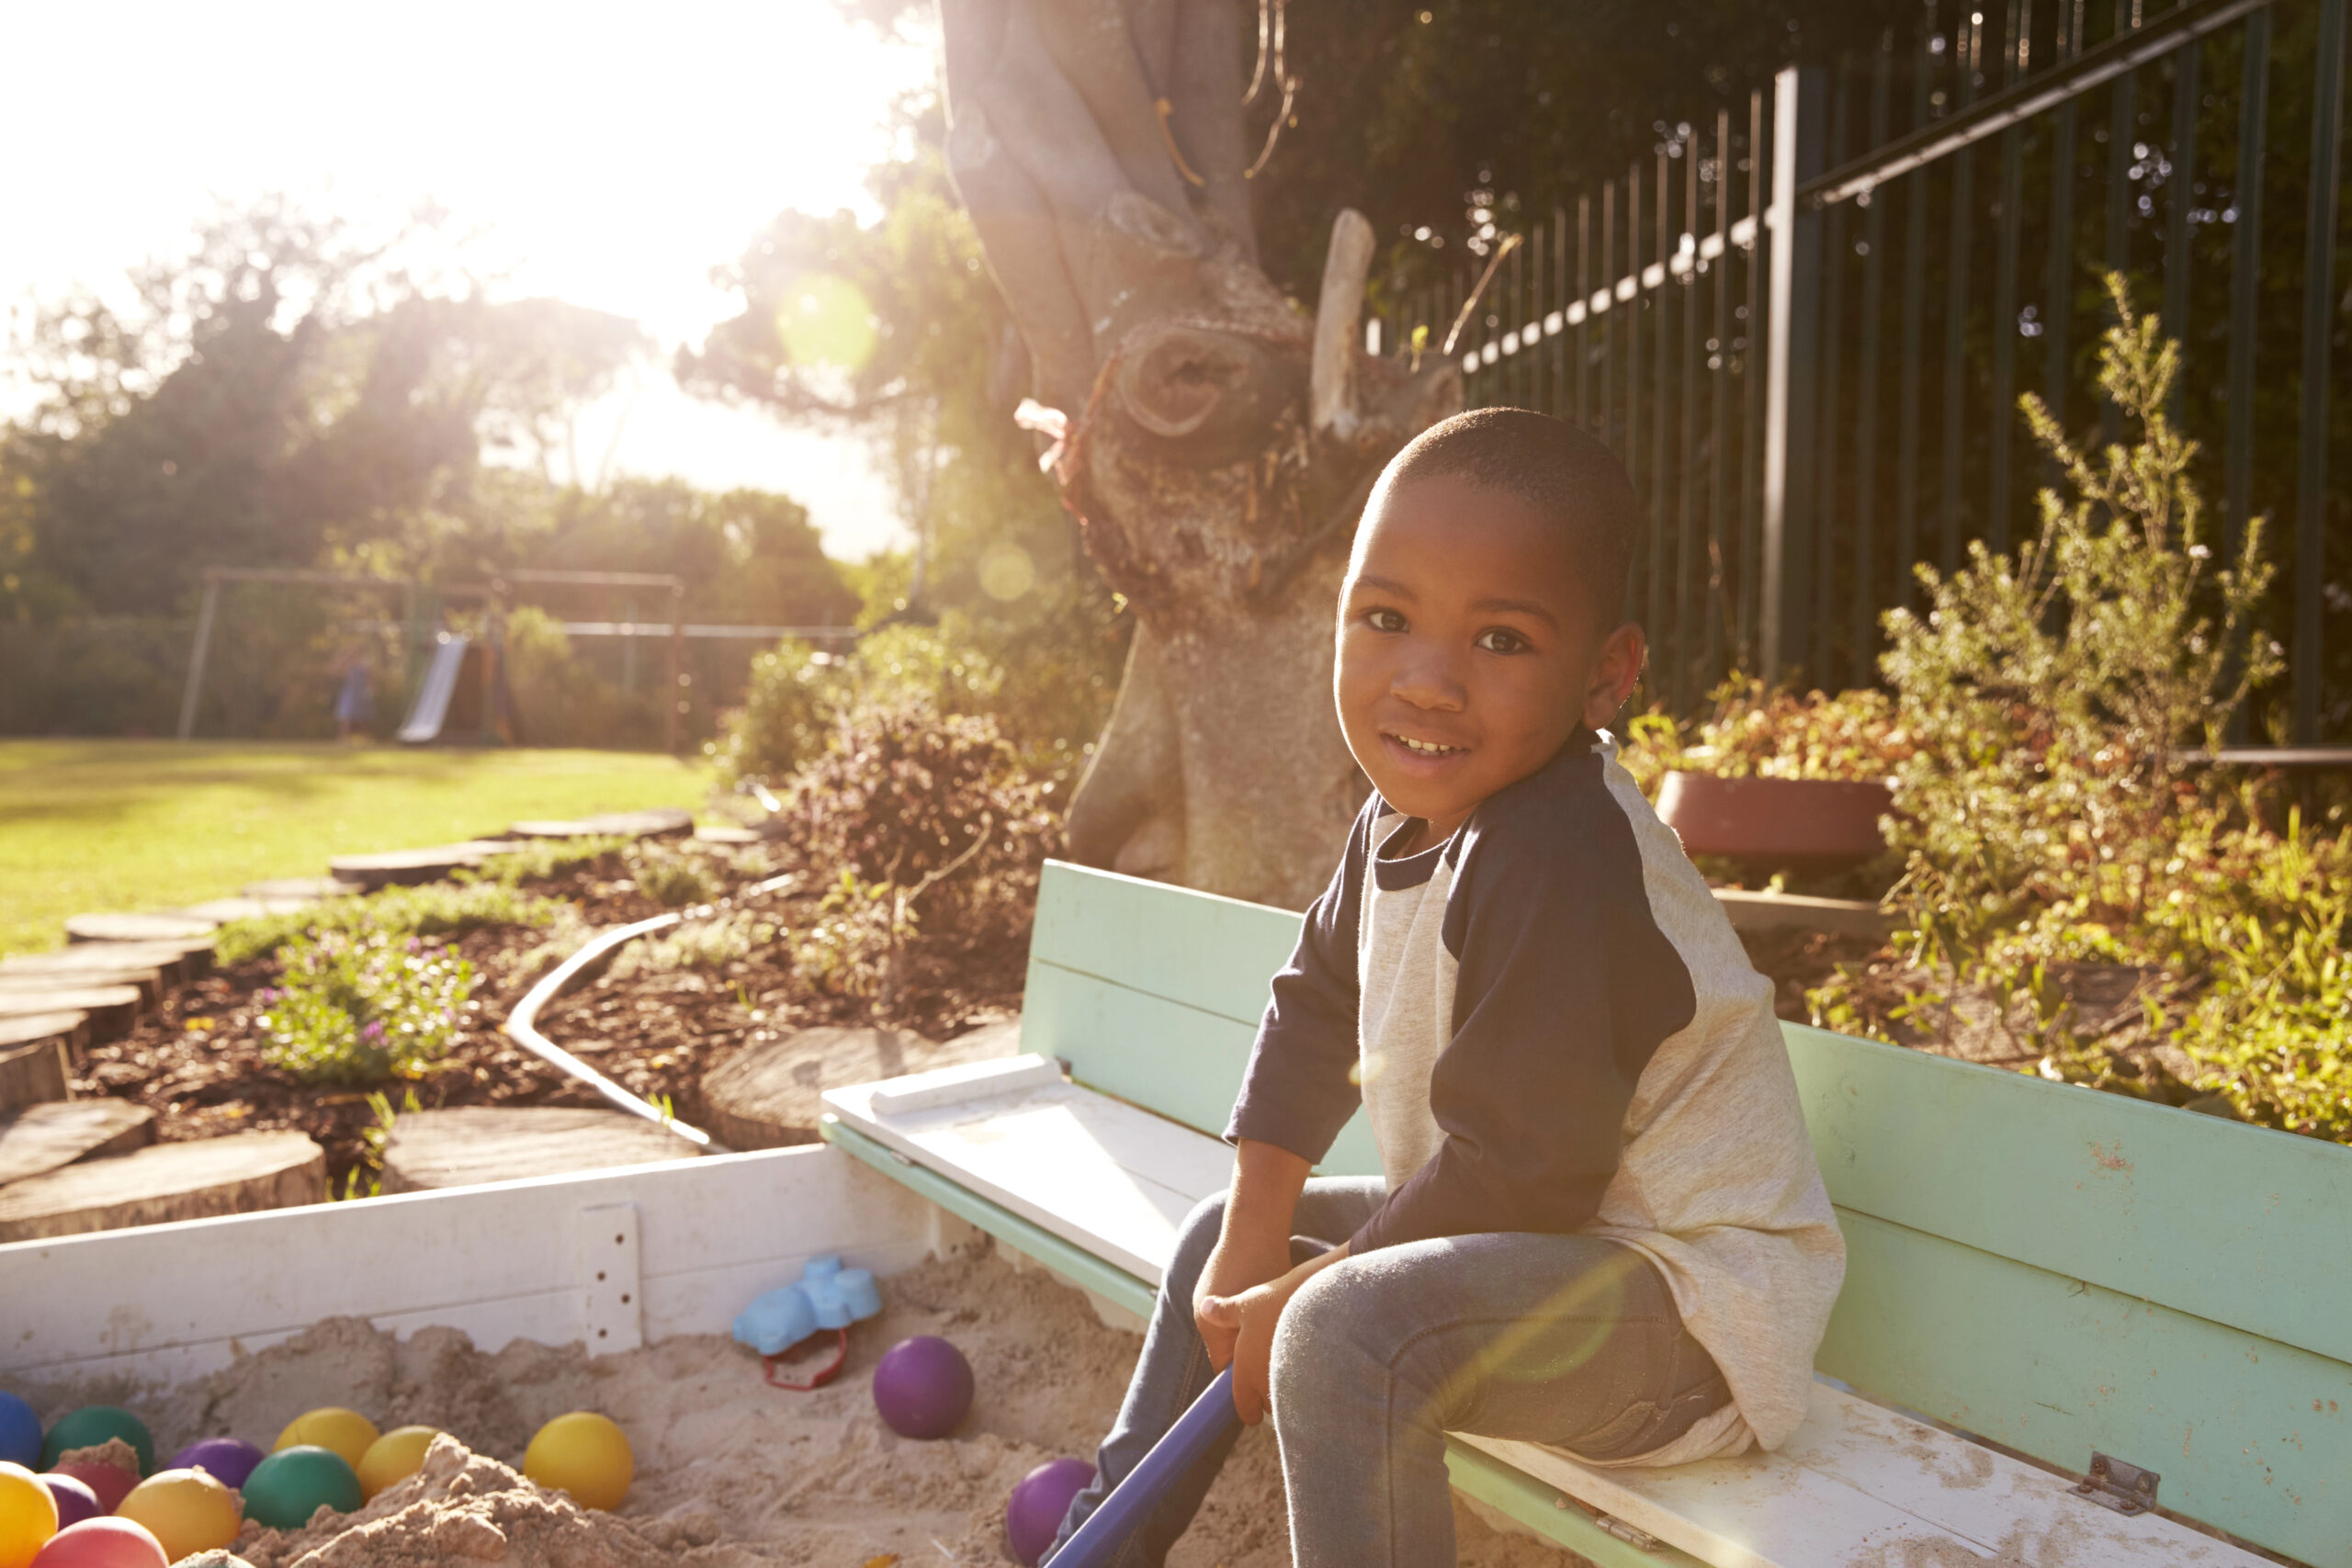 A young boy smiling and sitting in a sandbox filled with colorful balls, in a sunny outdoor setting. The image captures the essence of stimulating young minds through sensory play activities, highlighting the importance of engaging children in hands-on, exploratory play to enhance their cognitive development and senses.